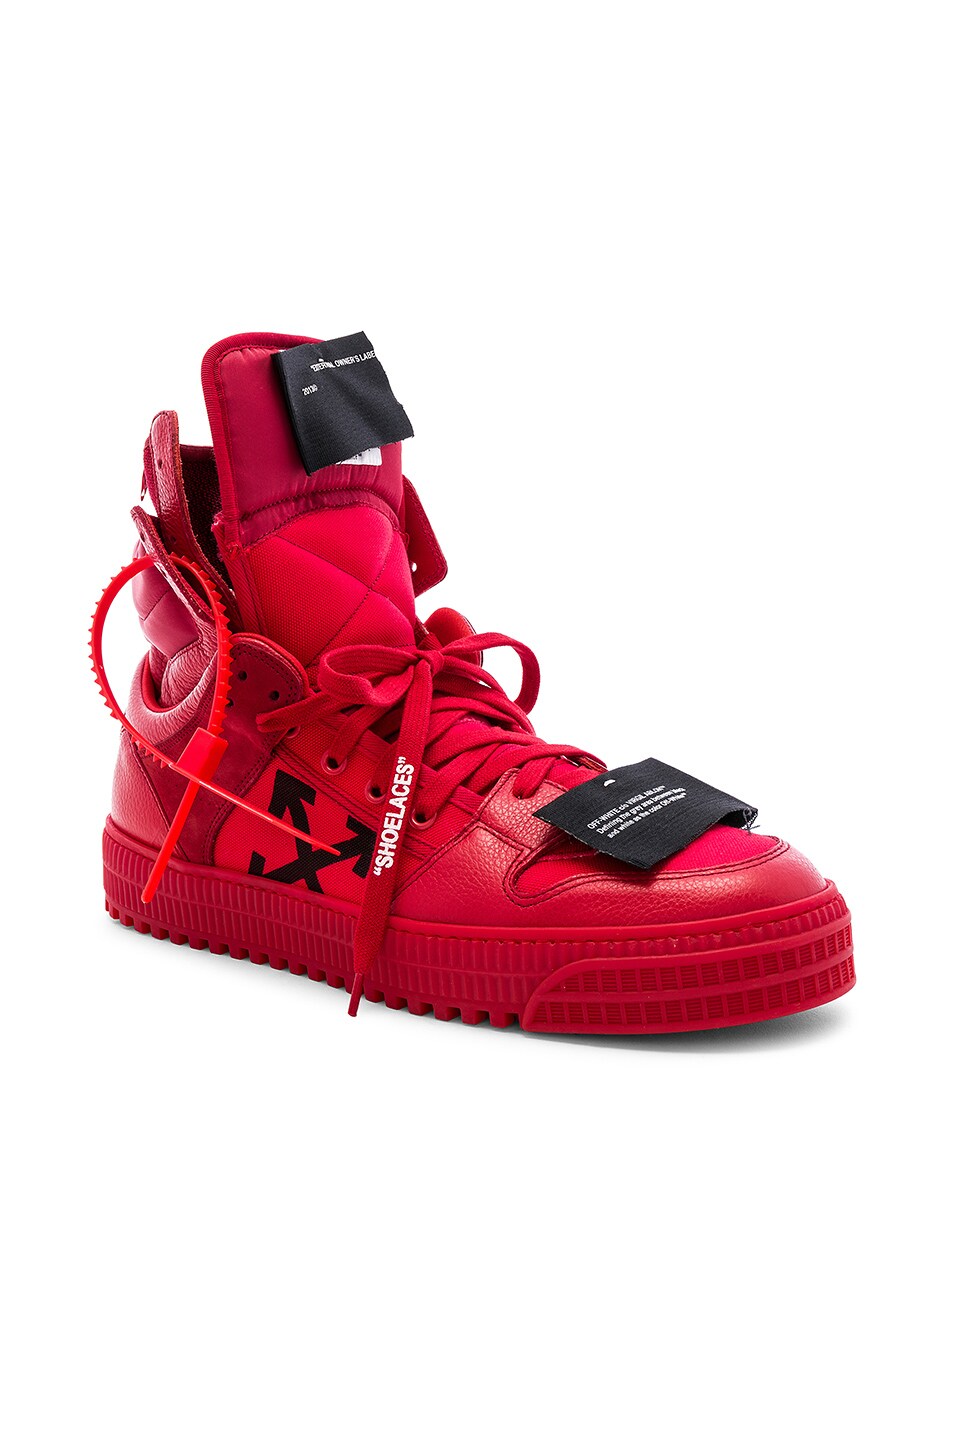 off white red shoes